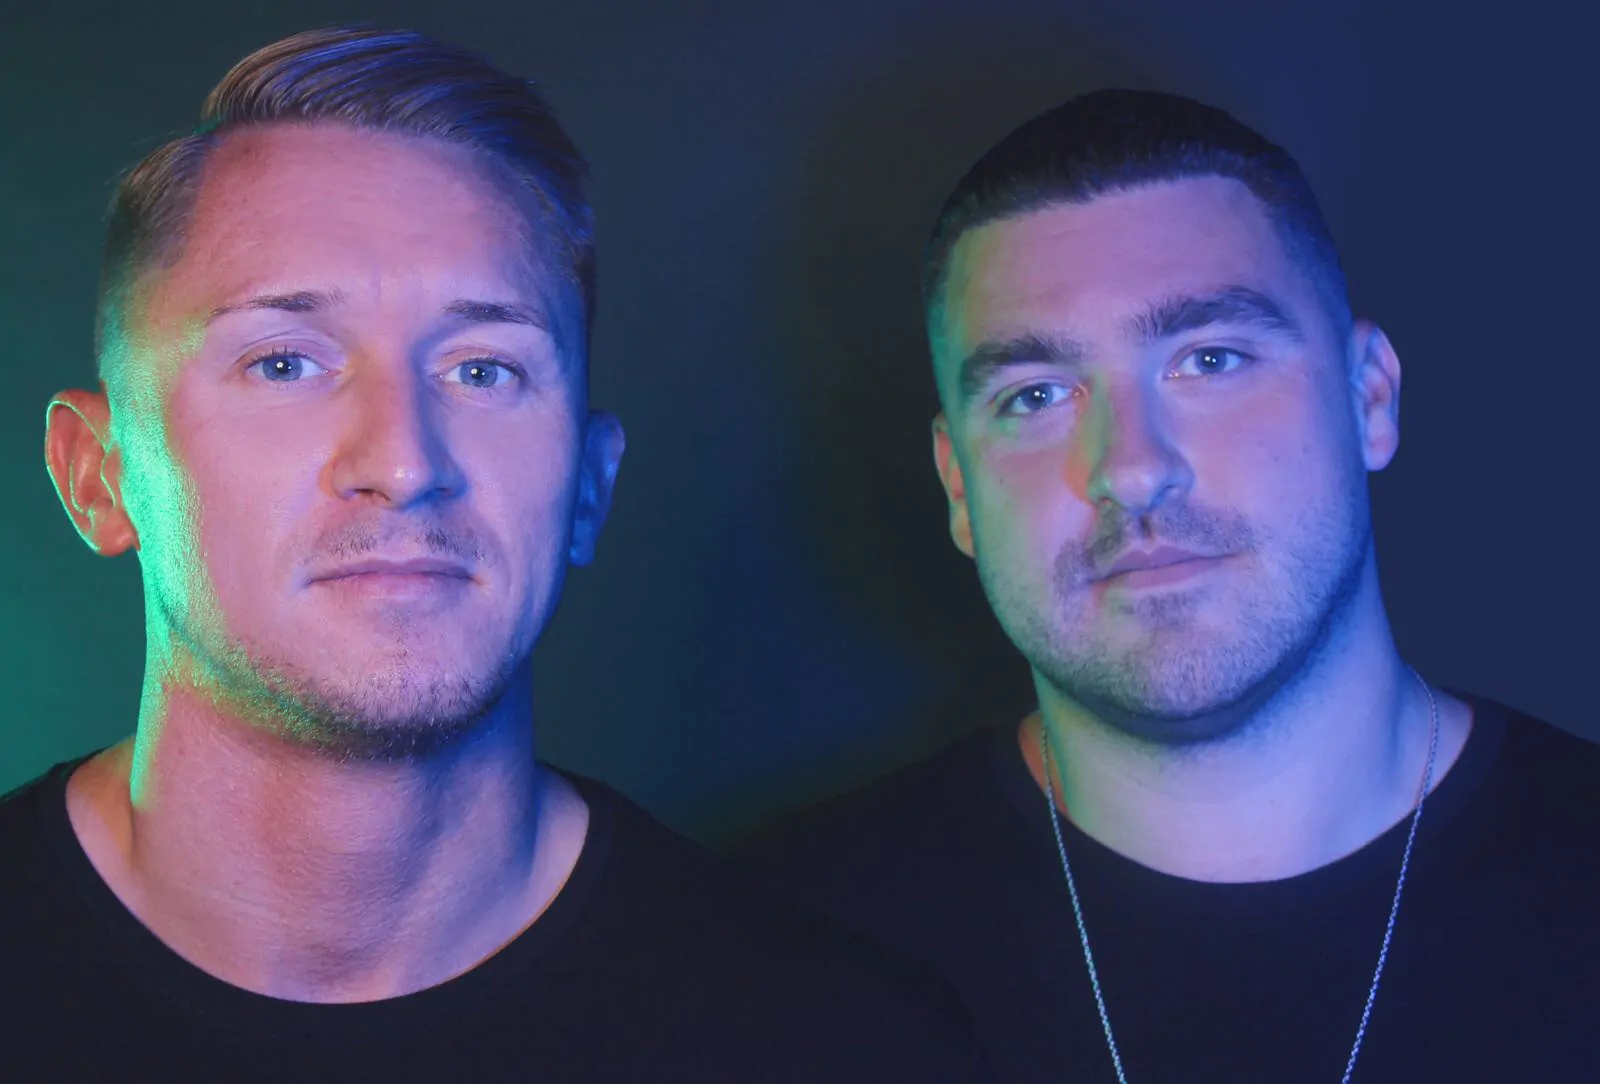 CAMELPHAT announced for CHSQ 2021 show on Saturday 7th August 2021